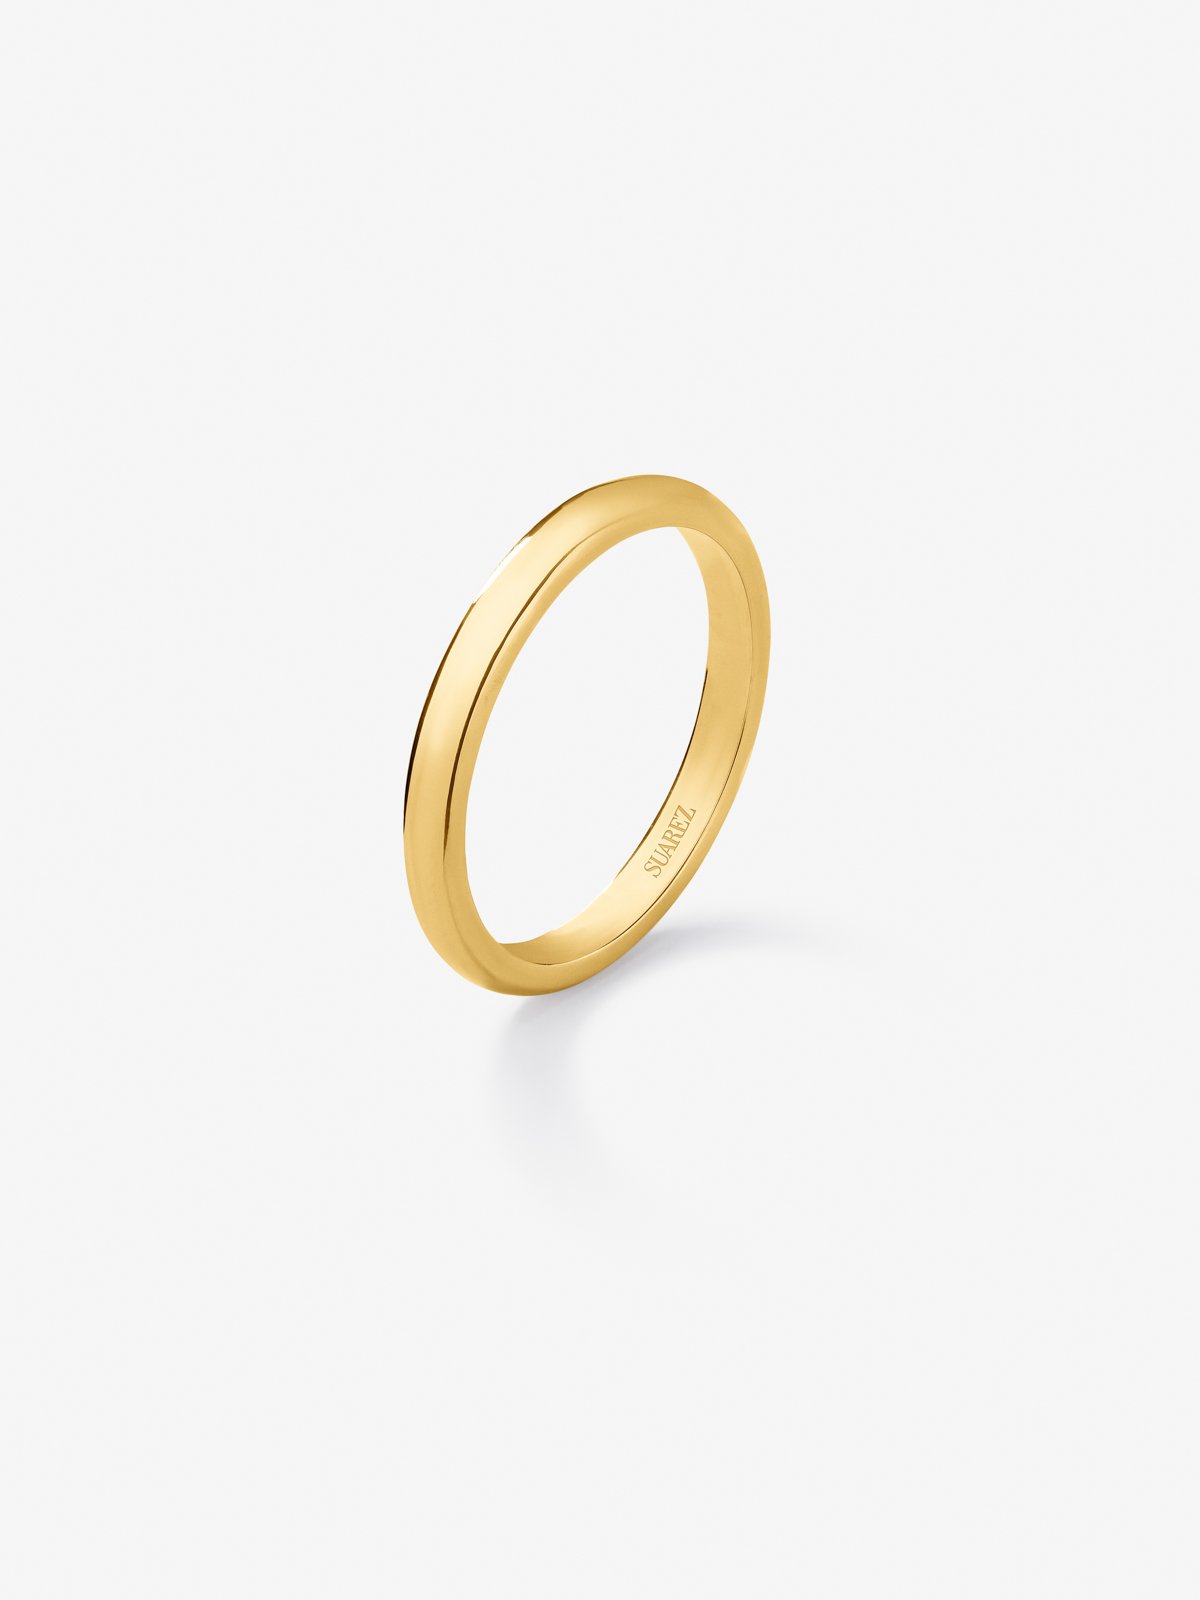 18K 1.55mm yellow flat compromise ring